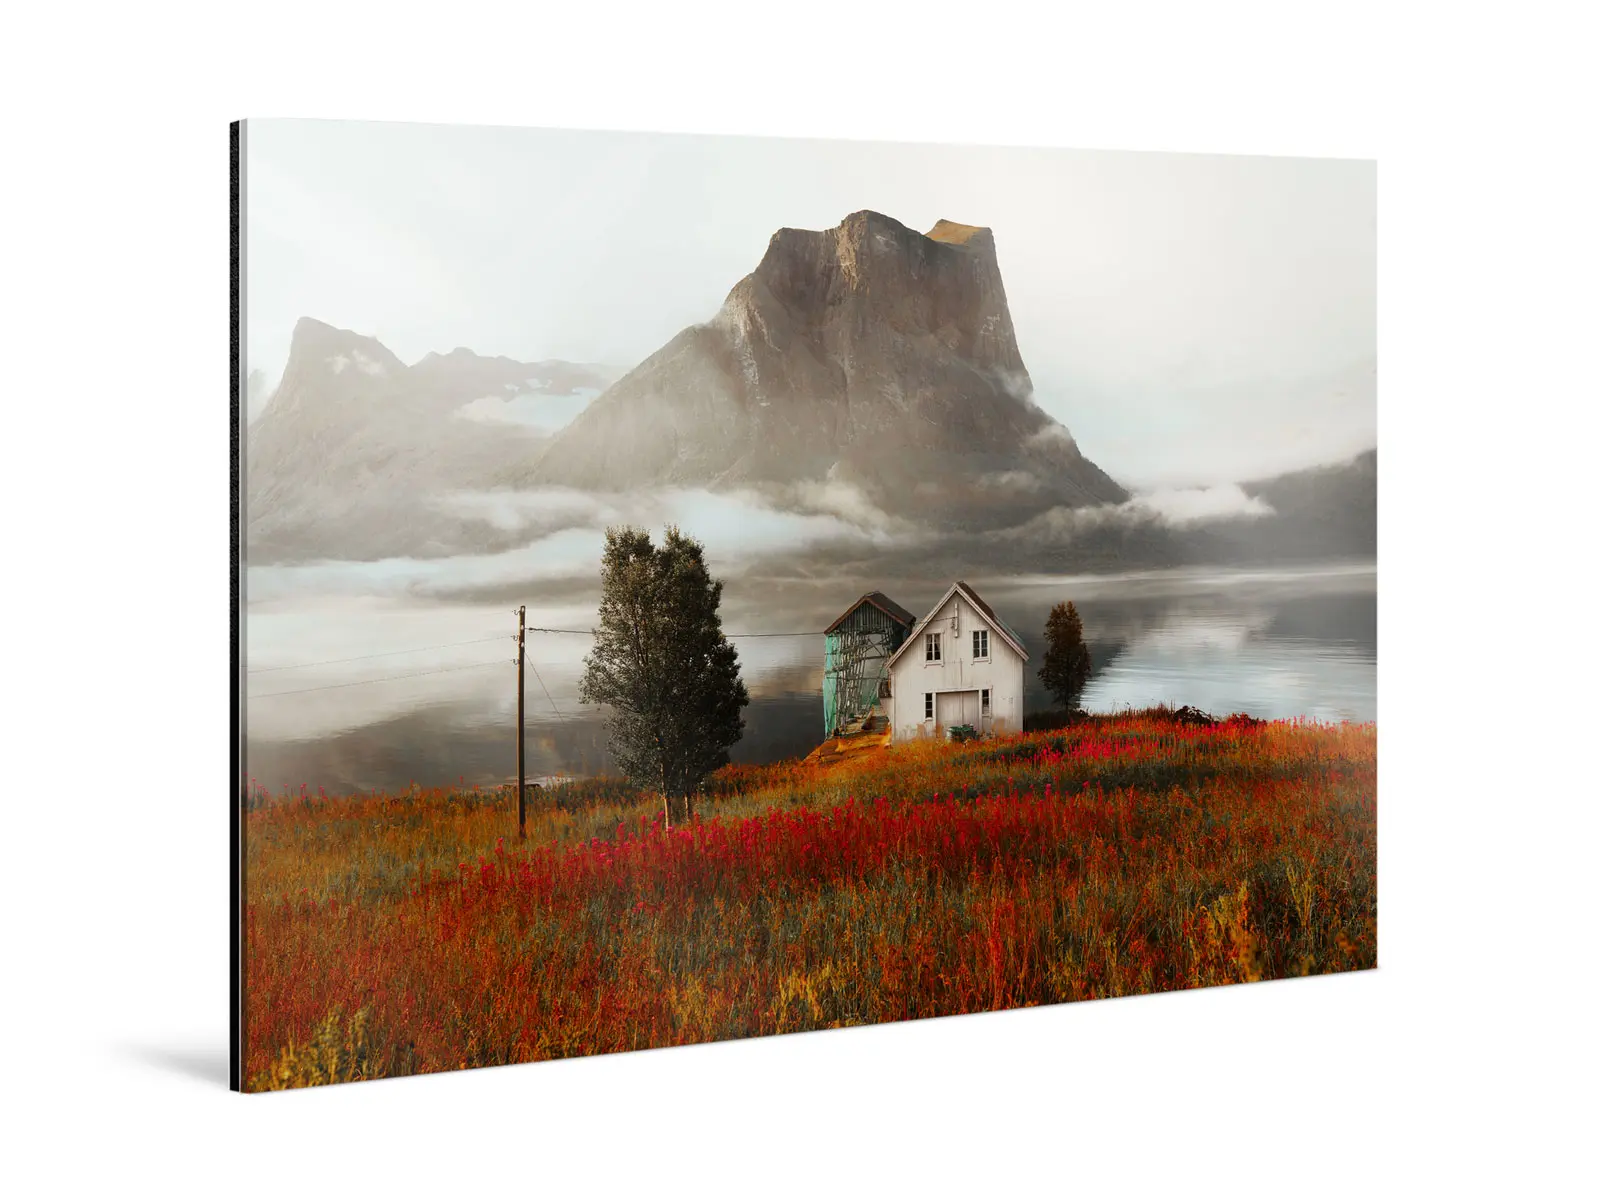 A country house in front of a mountain as original photo print under matte acrylic glass.